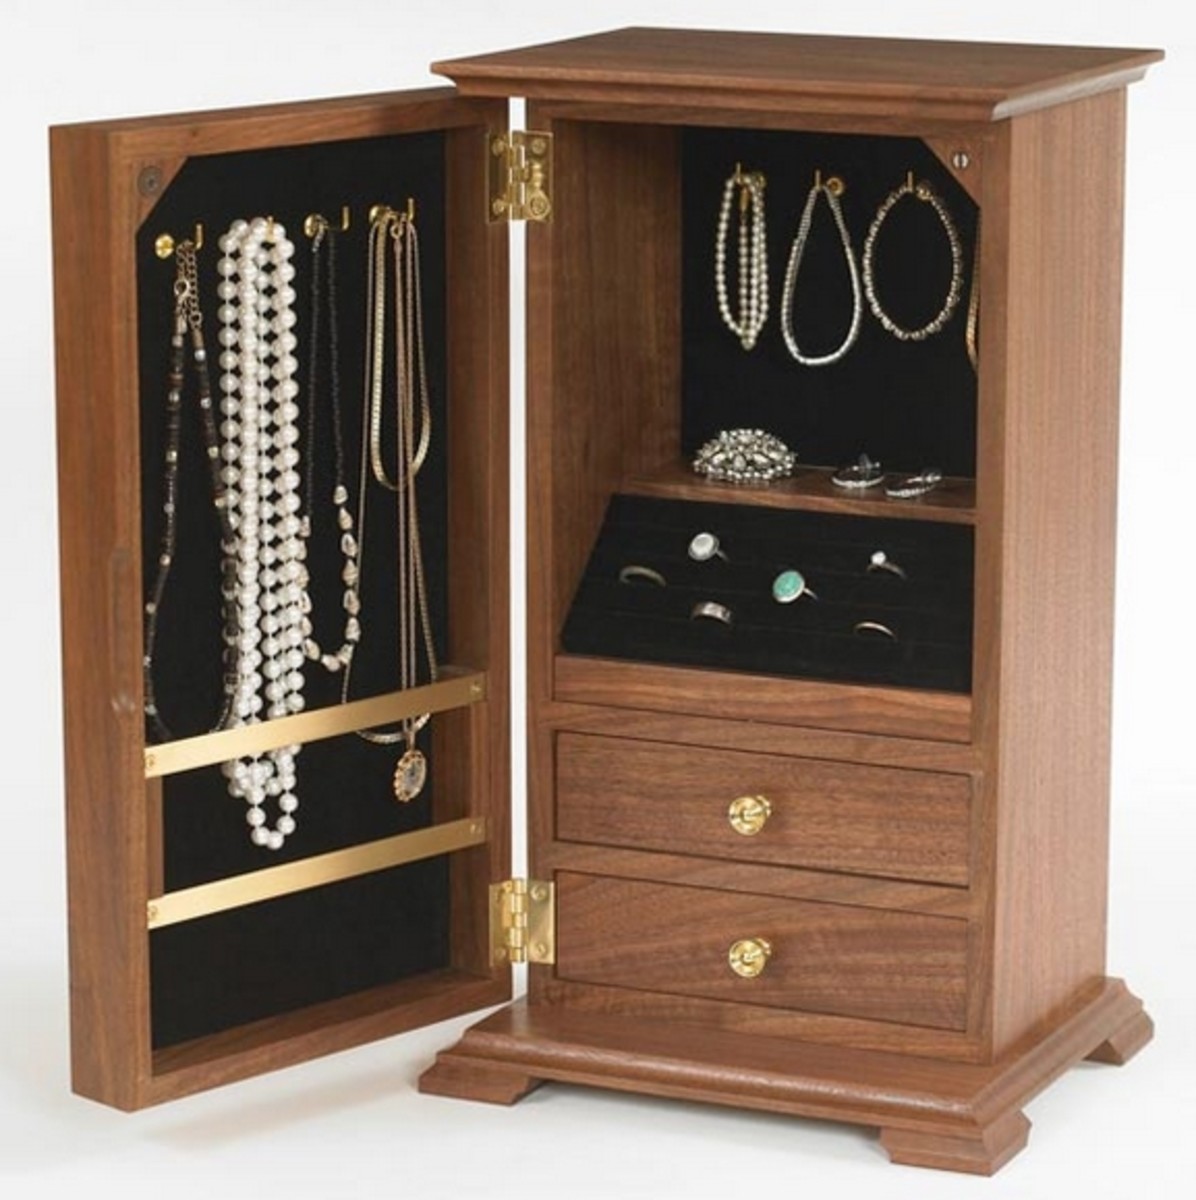 This is a sample jewelry chest or armoire.